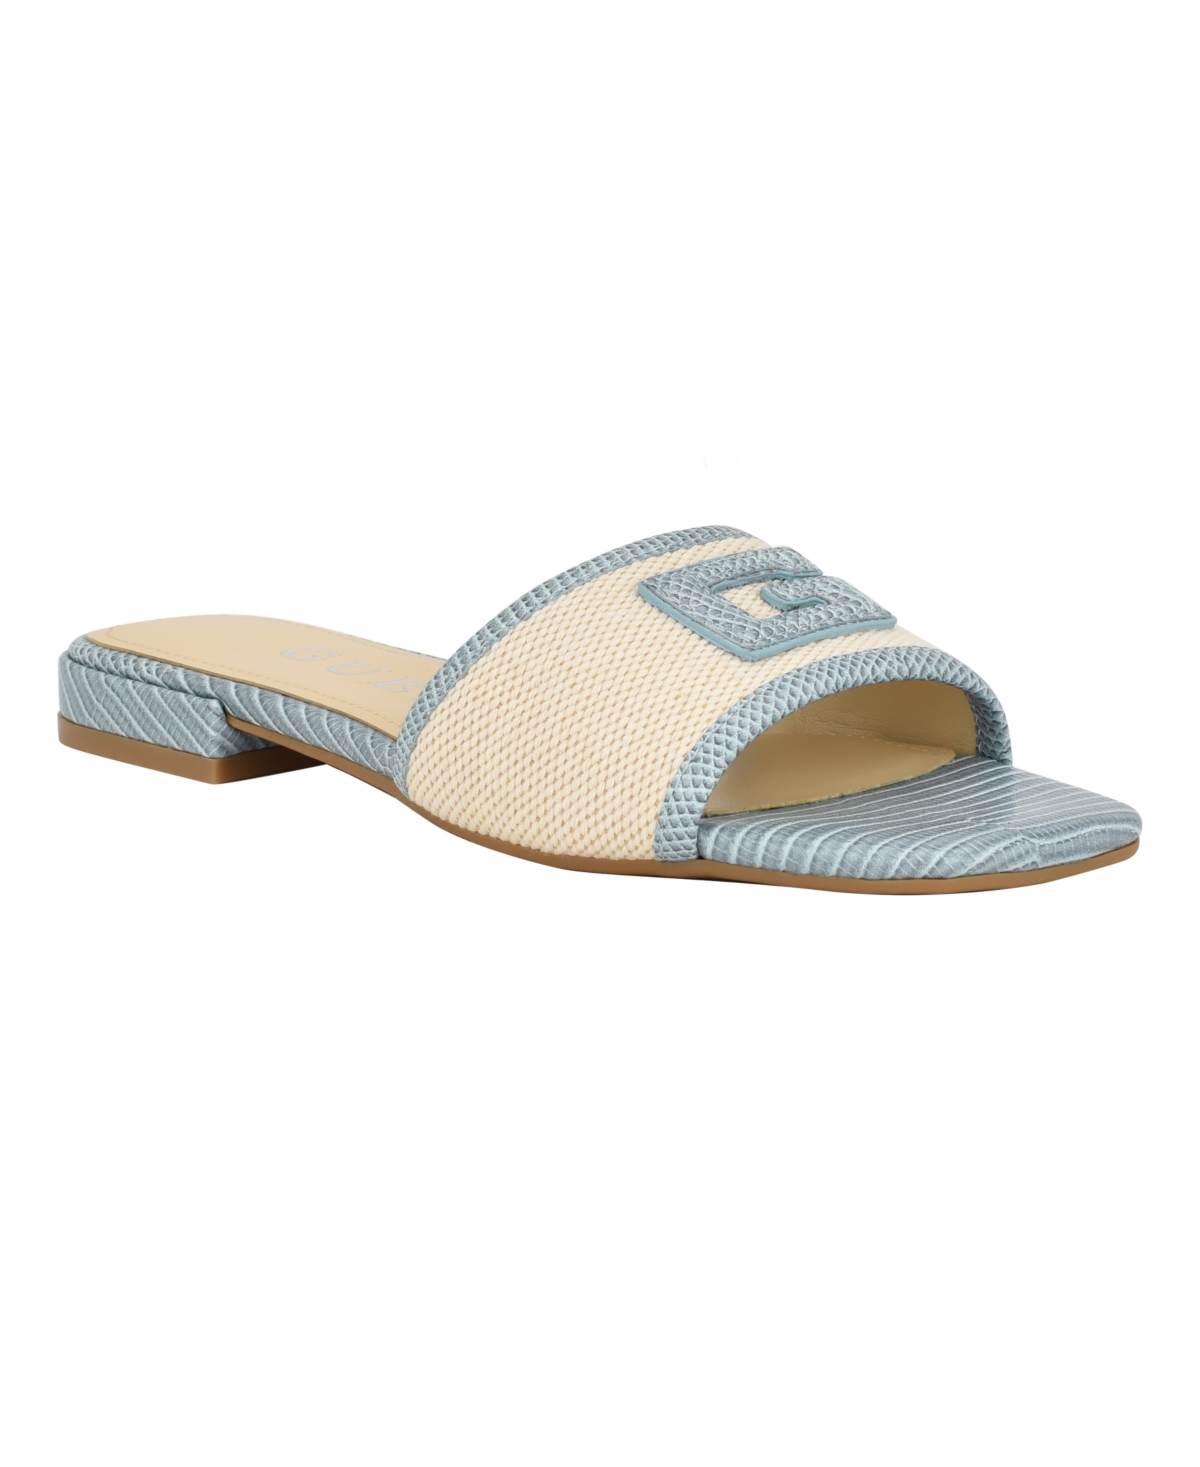 GUESS WOMEN'S TAMPA SLIDE-ON SANDALS WITH WOVEN LOGO DETAIL